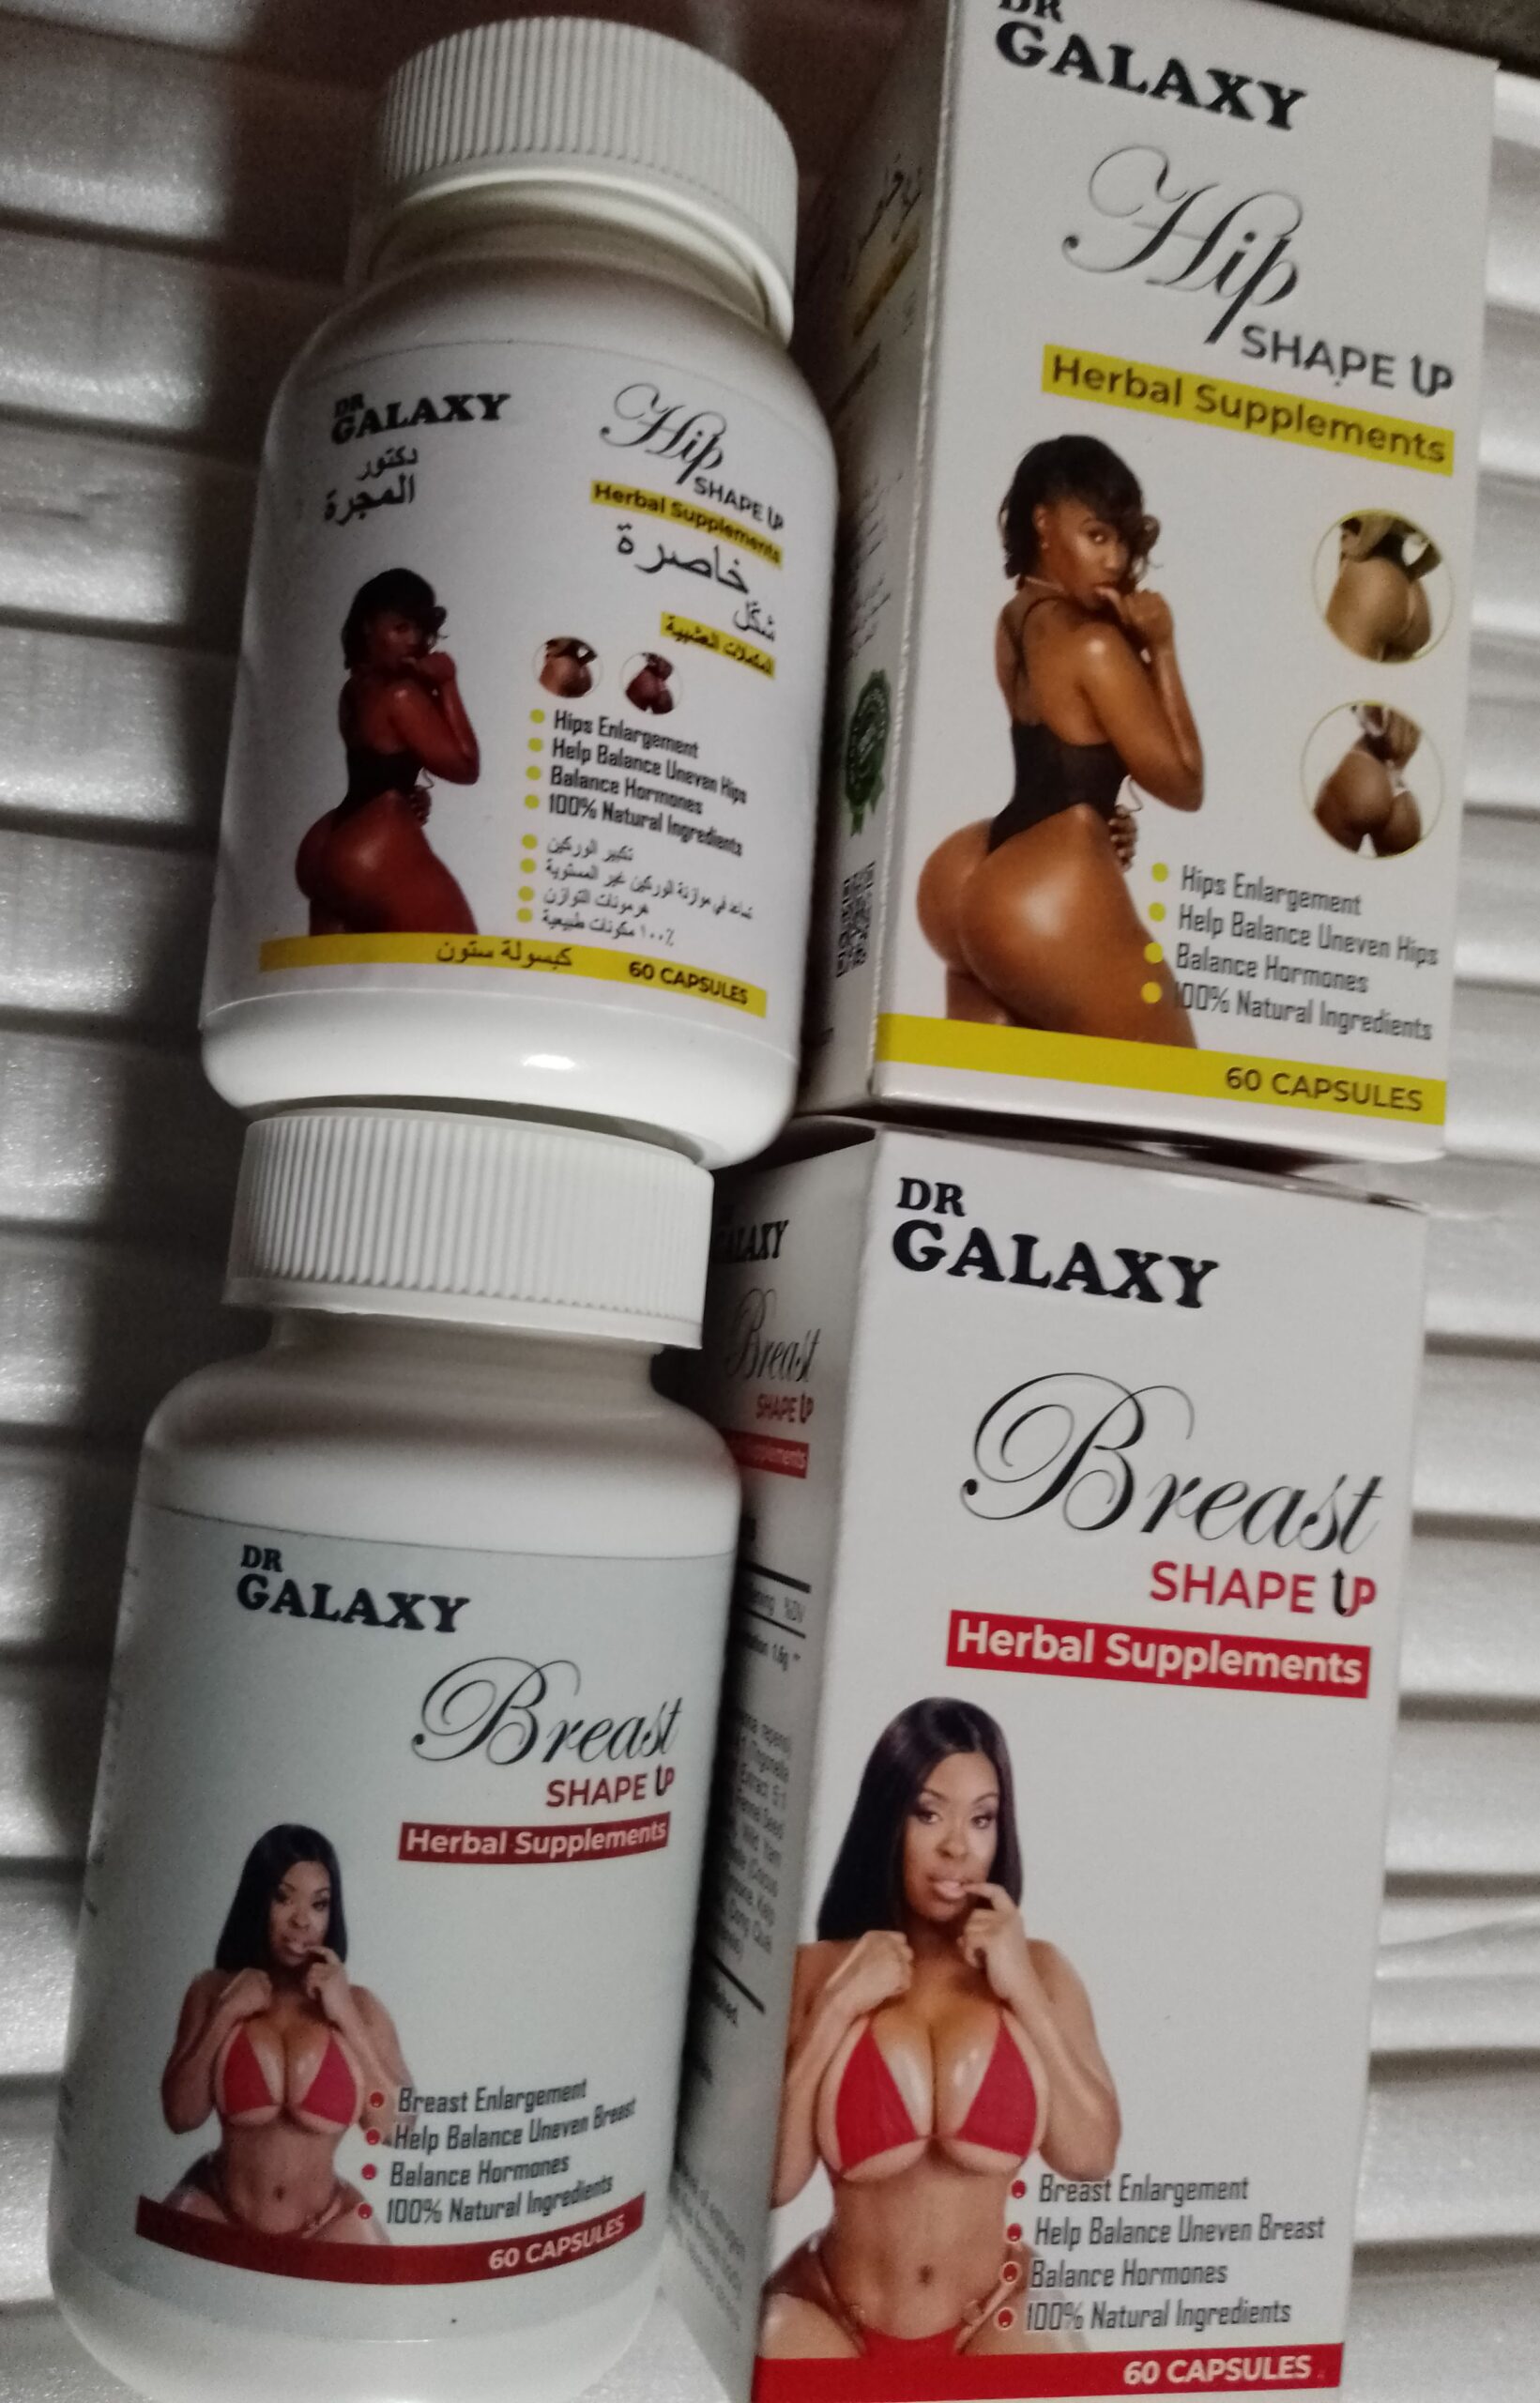 Dr. Galaxy Breast, Butt Shape Up Capsule